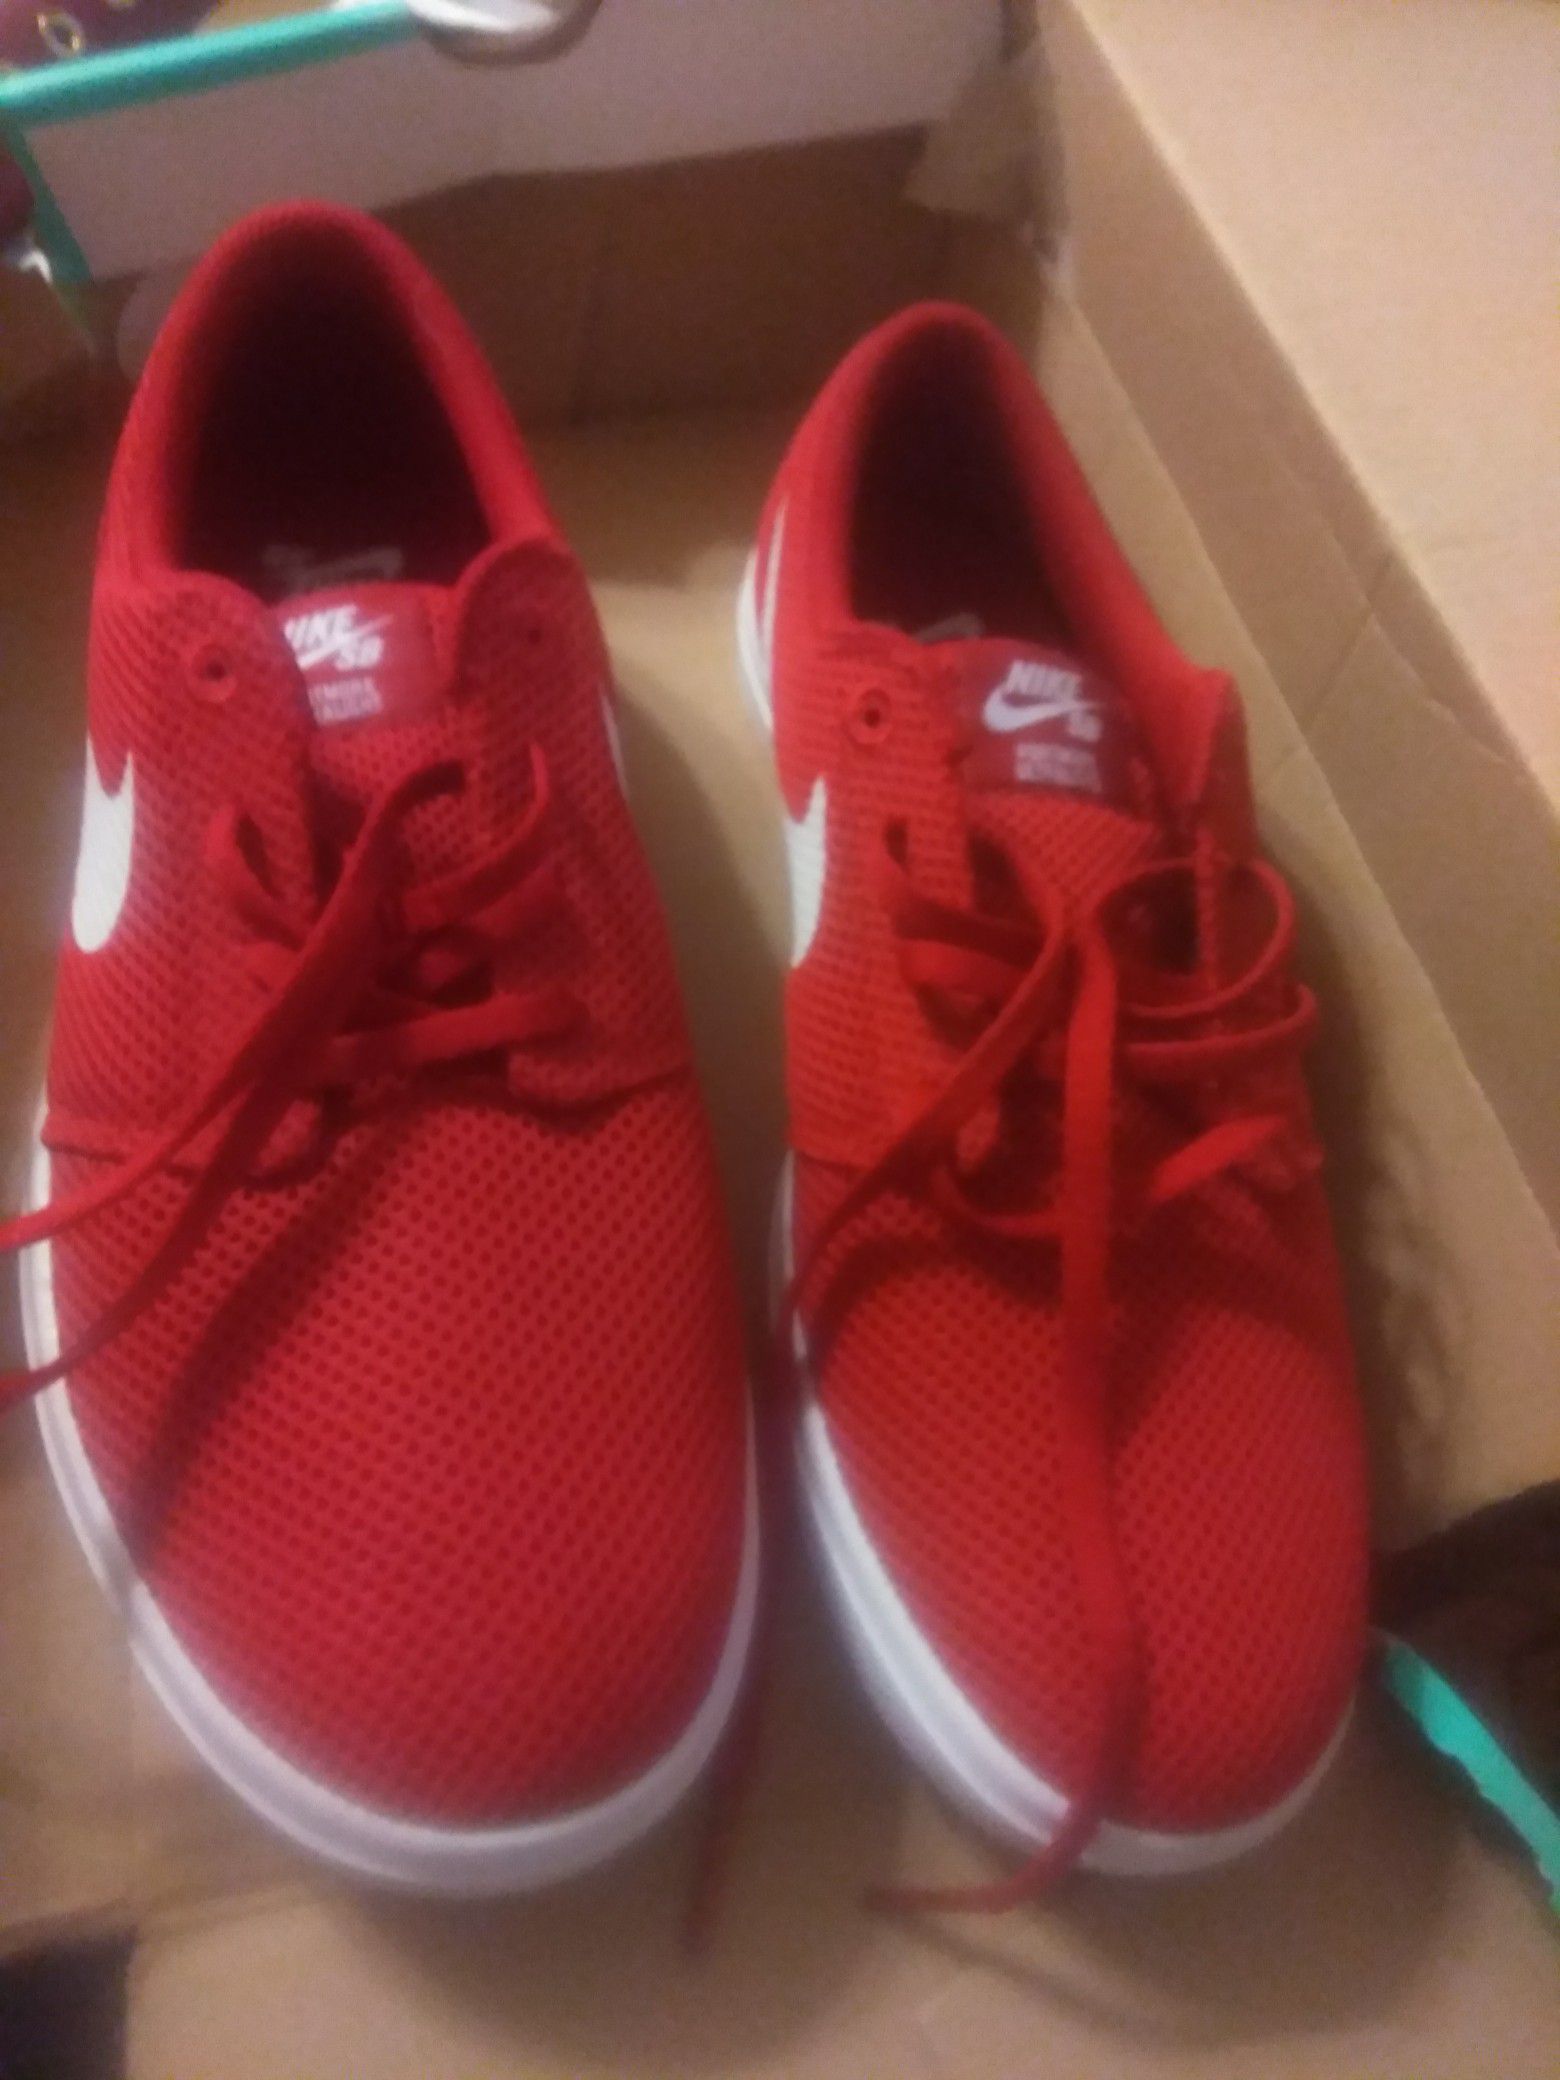 Nike shoes never worn brand new